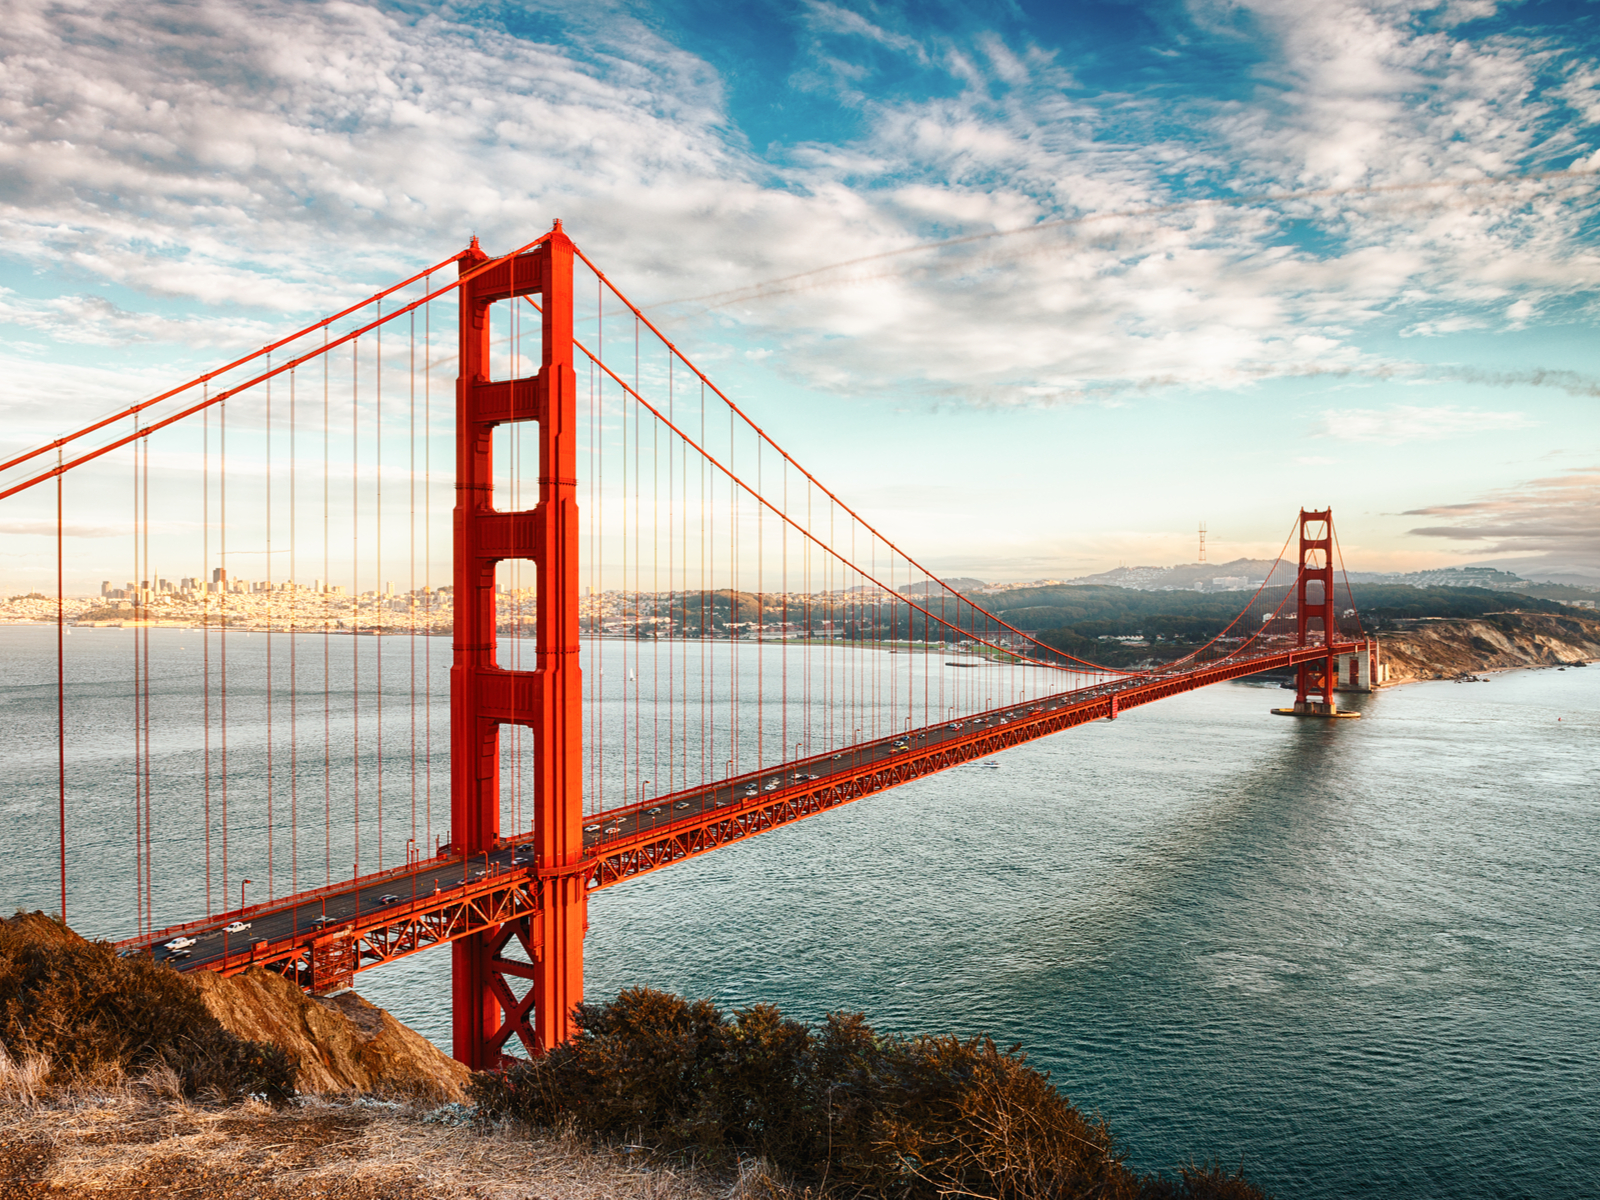 Golden gate bridge, one of the best things to do in San Francisco, as viewed on a fall day